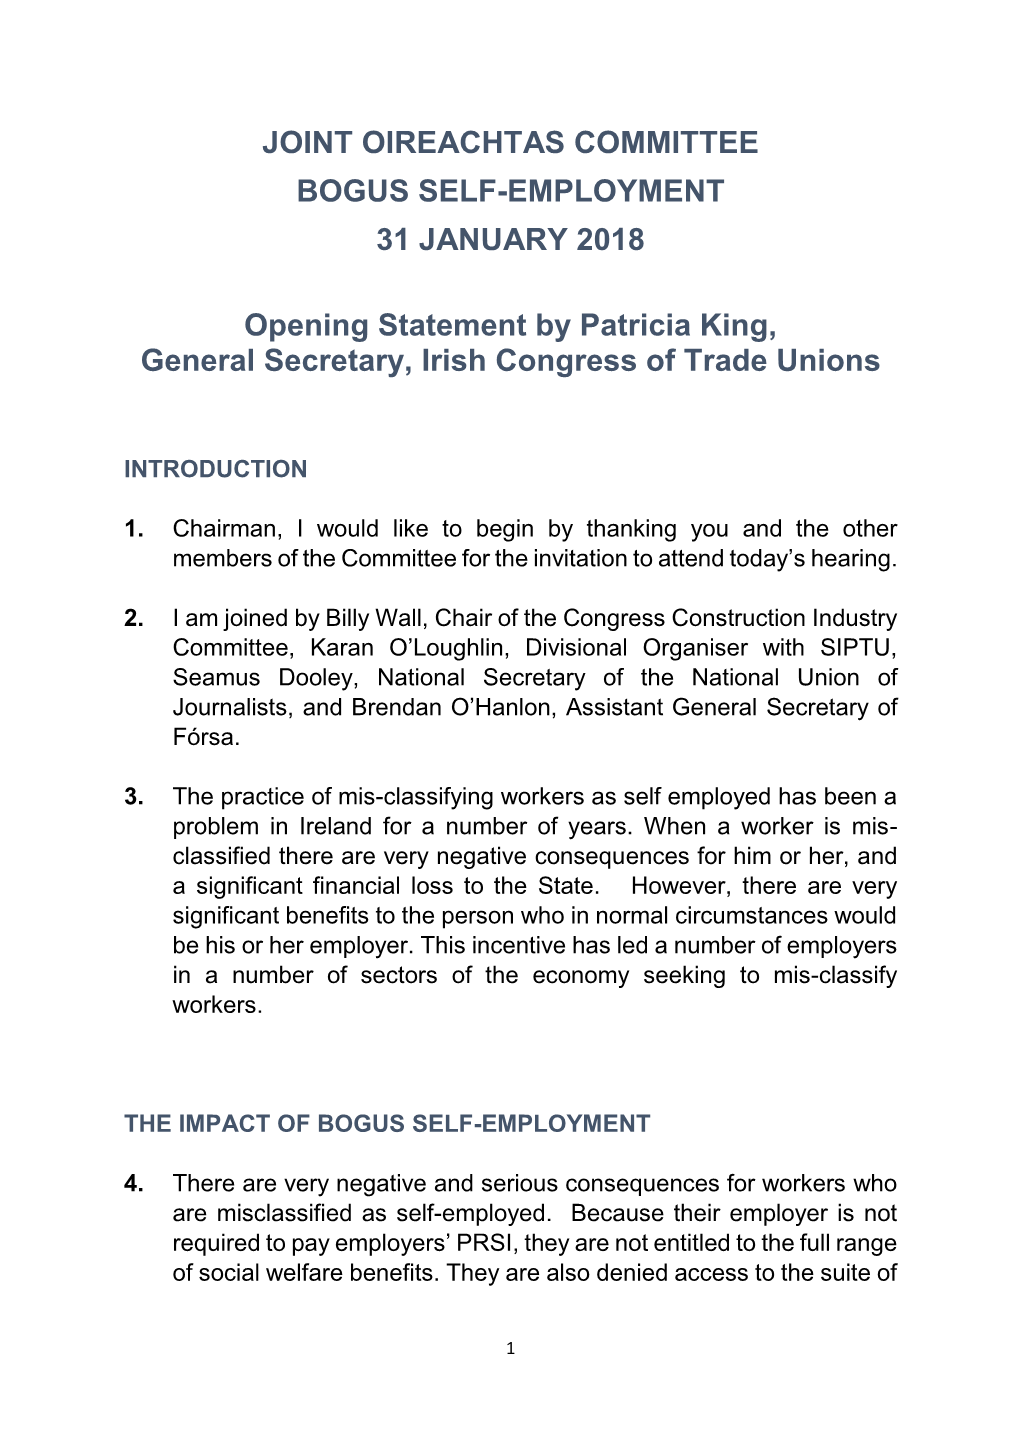 Joint Oireachtas Committee Bogus Self-Employment 31 January 2018